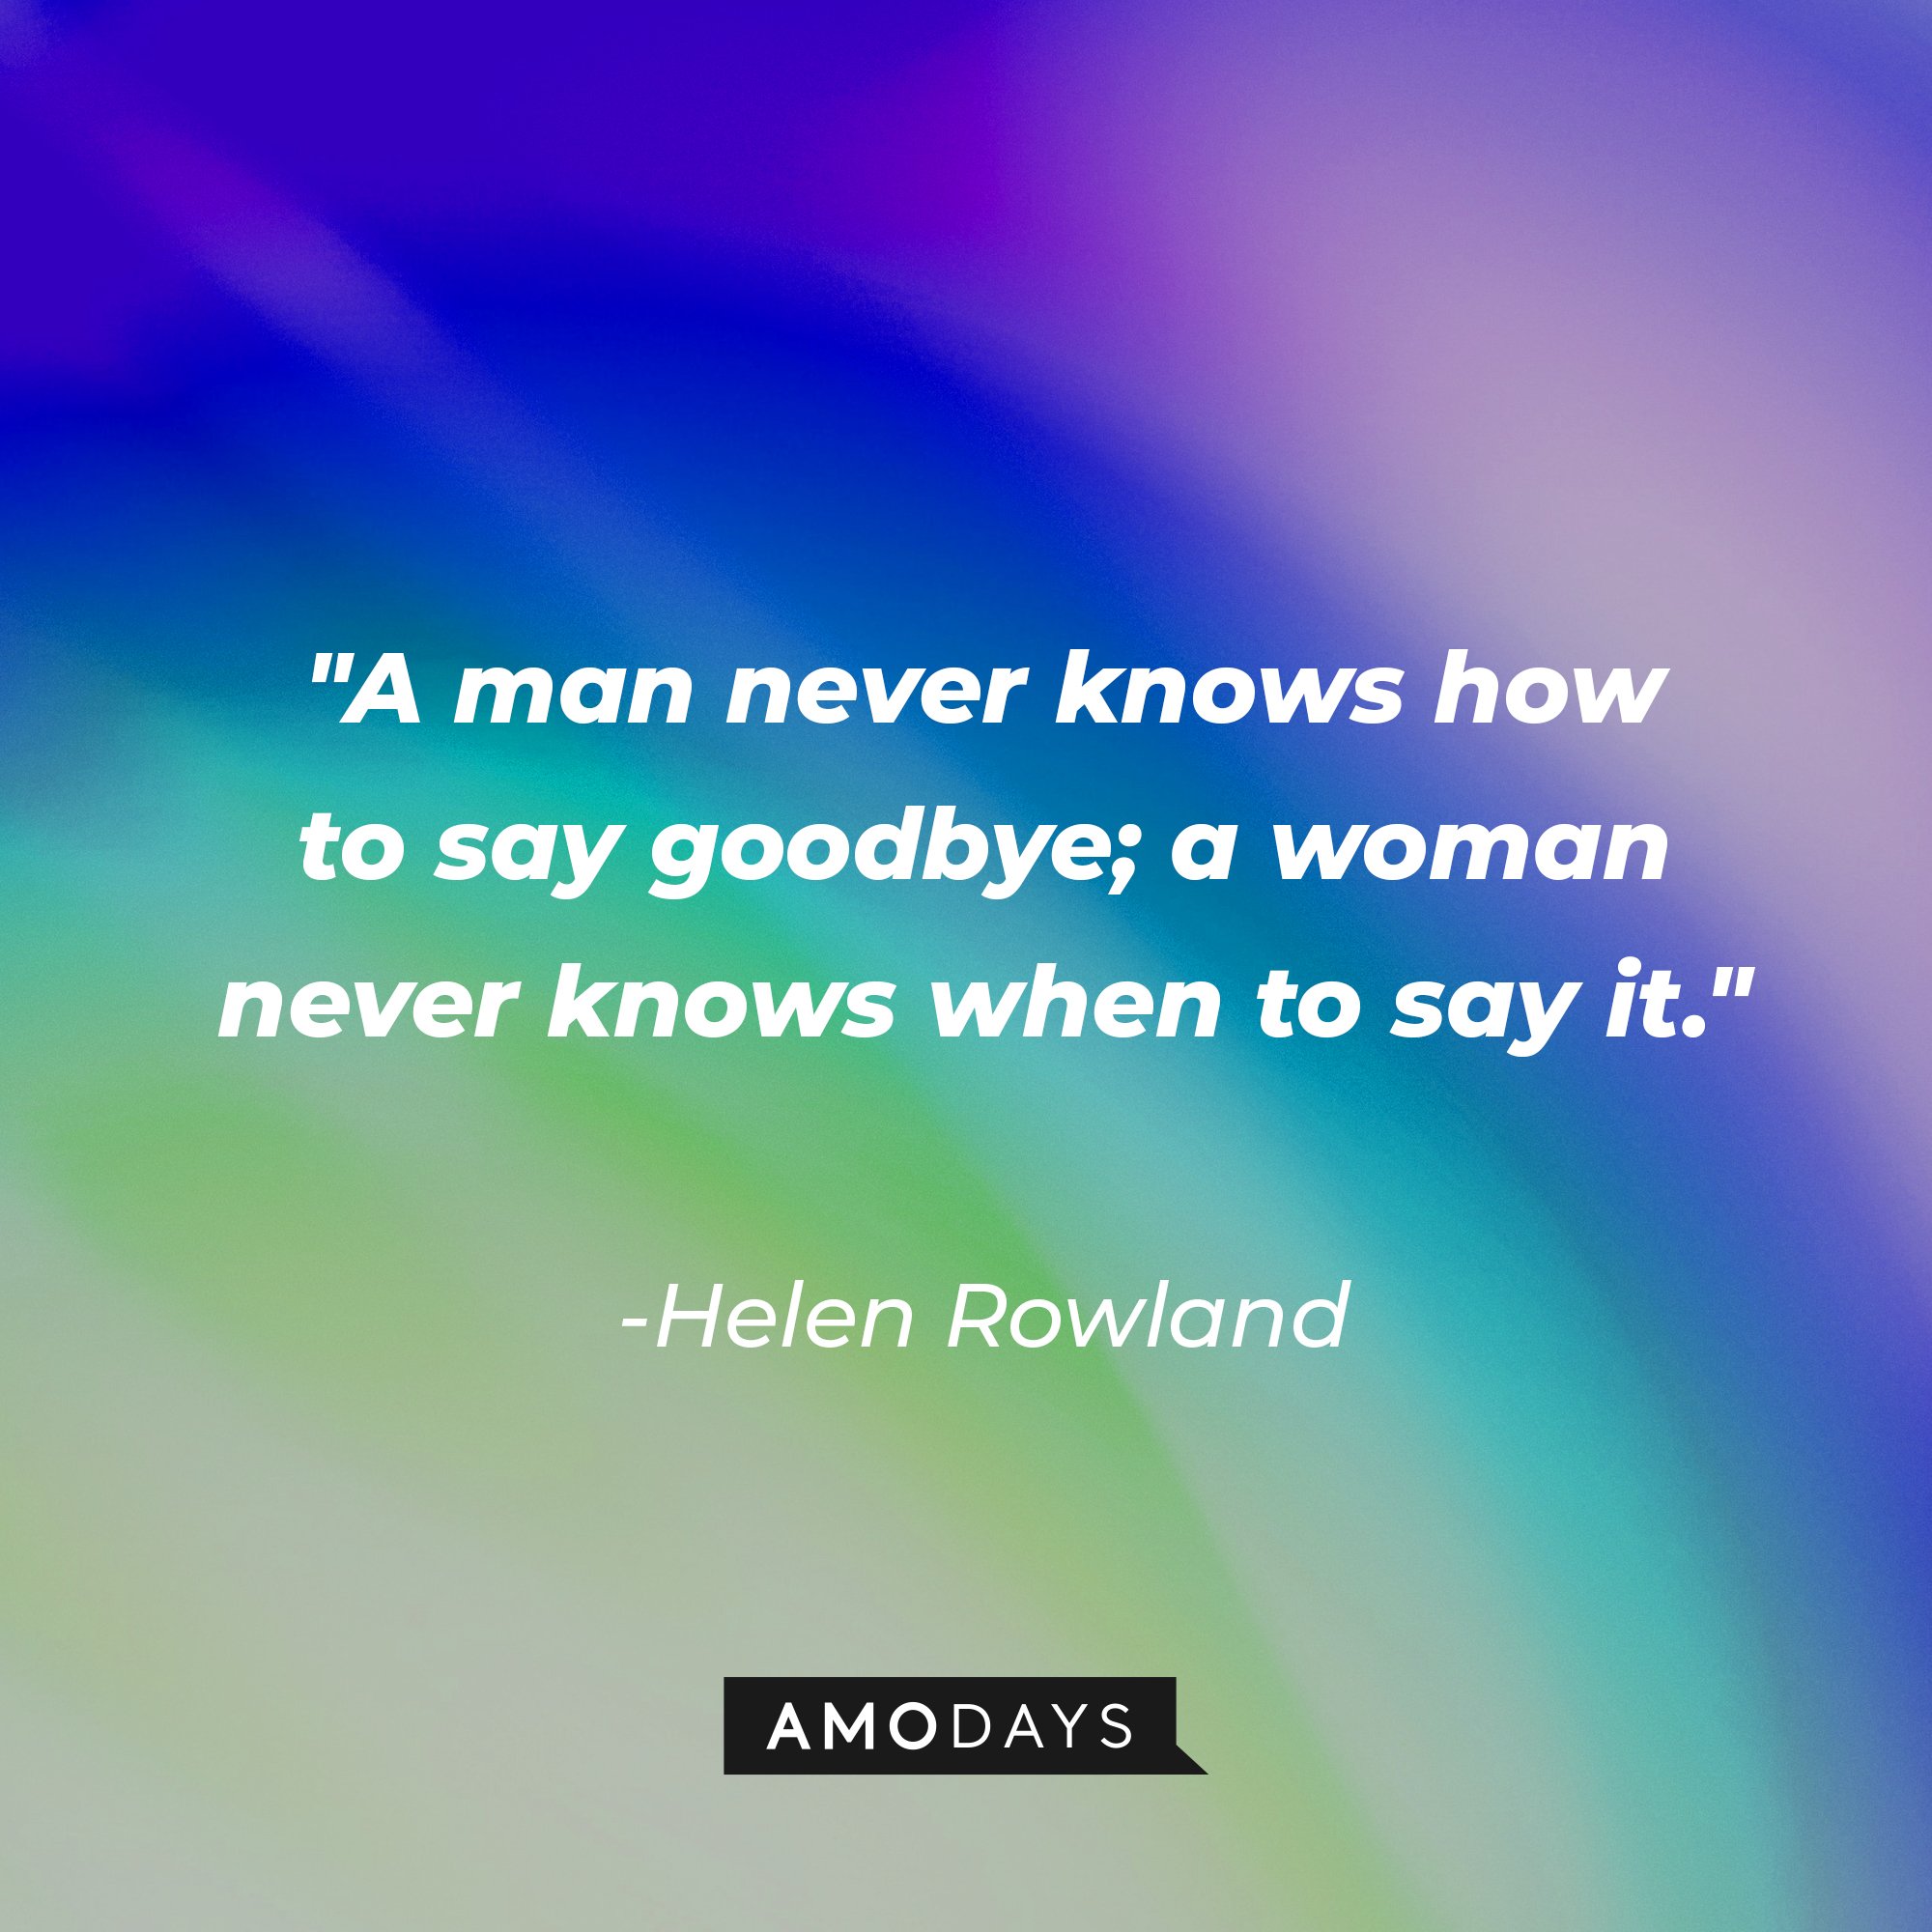 Helen Rowland's quote: "A man never knows how to say goodbye; a woman never knows when to say it." | Image: AmoDays